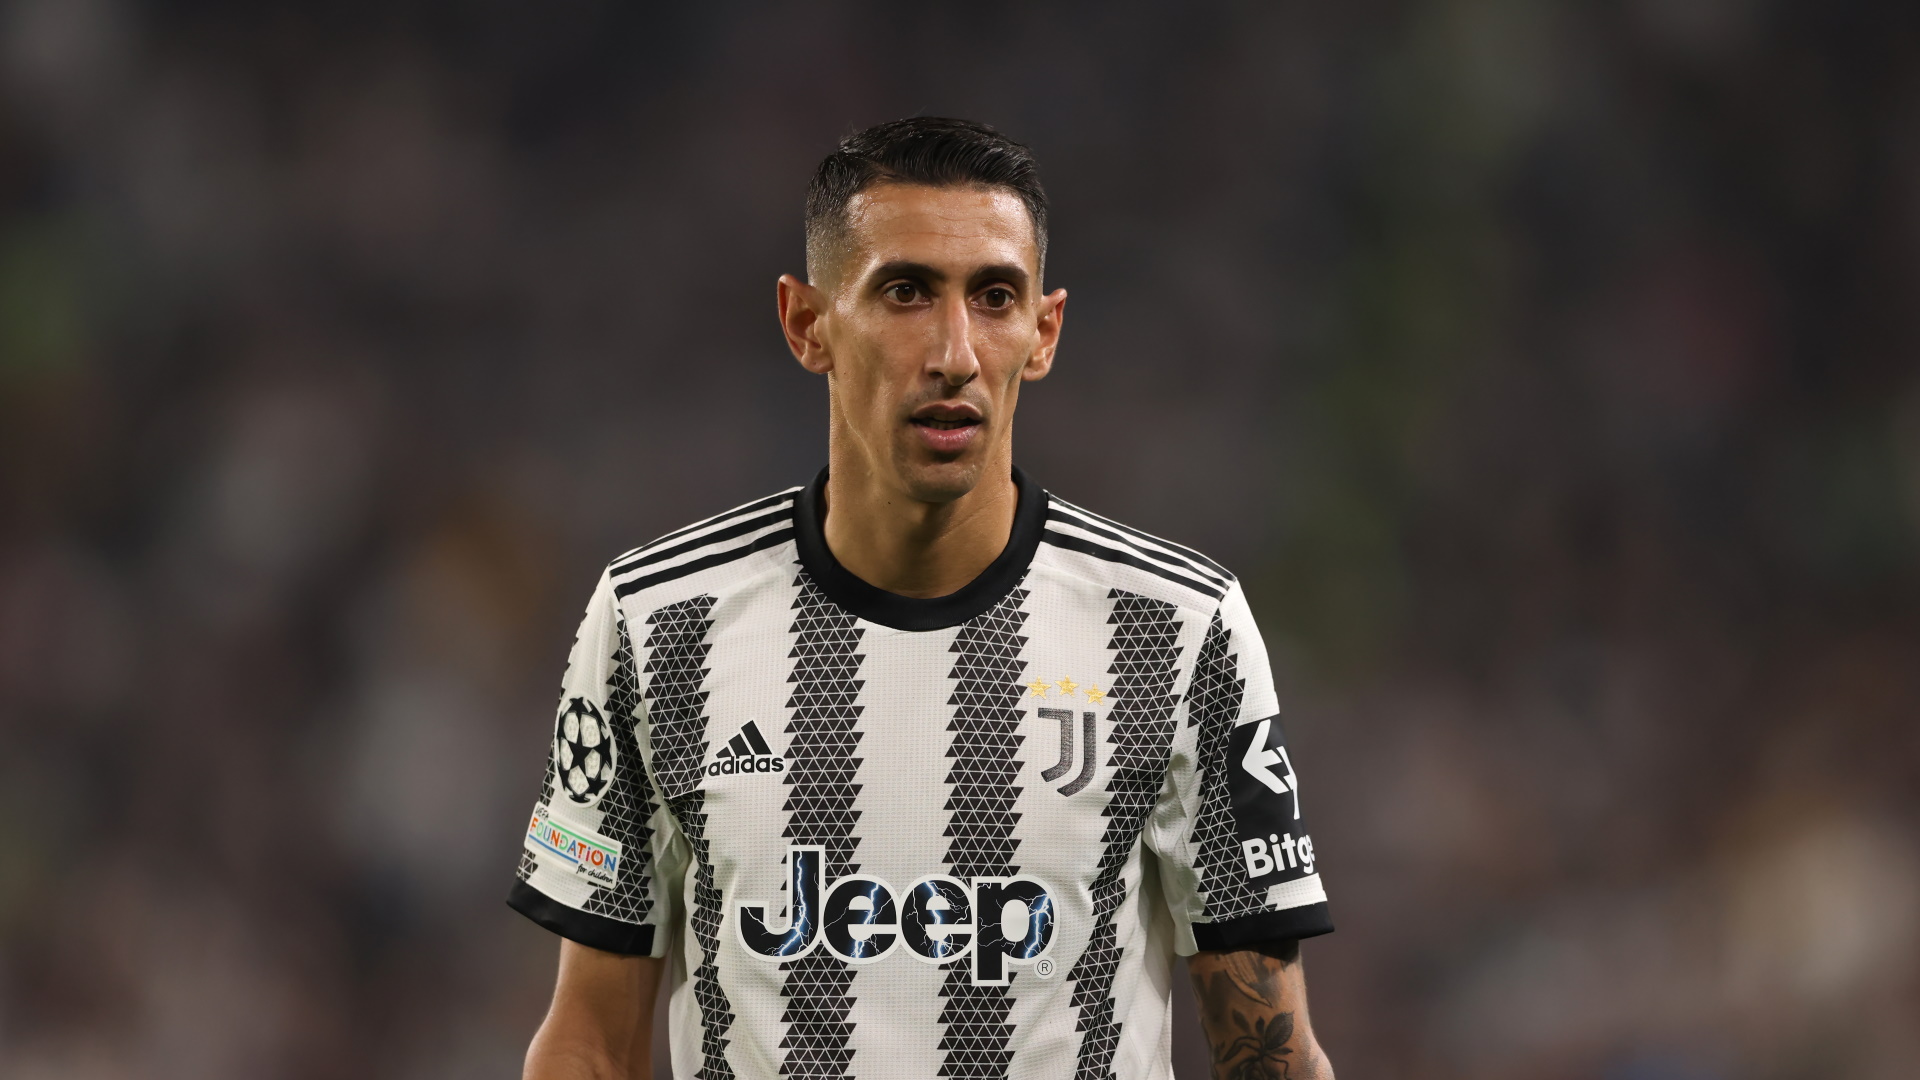 Angel Di Maria and Juventus will not continue together past the current season, as the player announced on his Instagram profile.